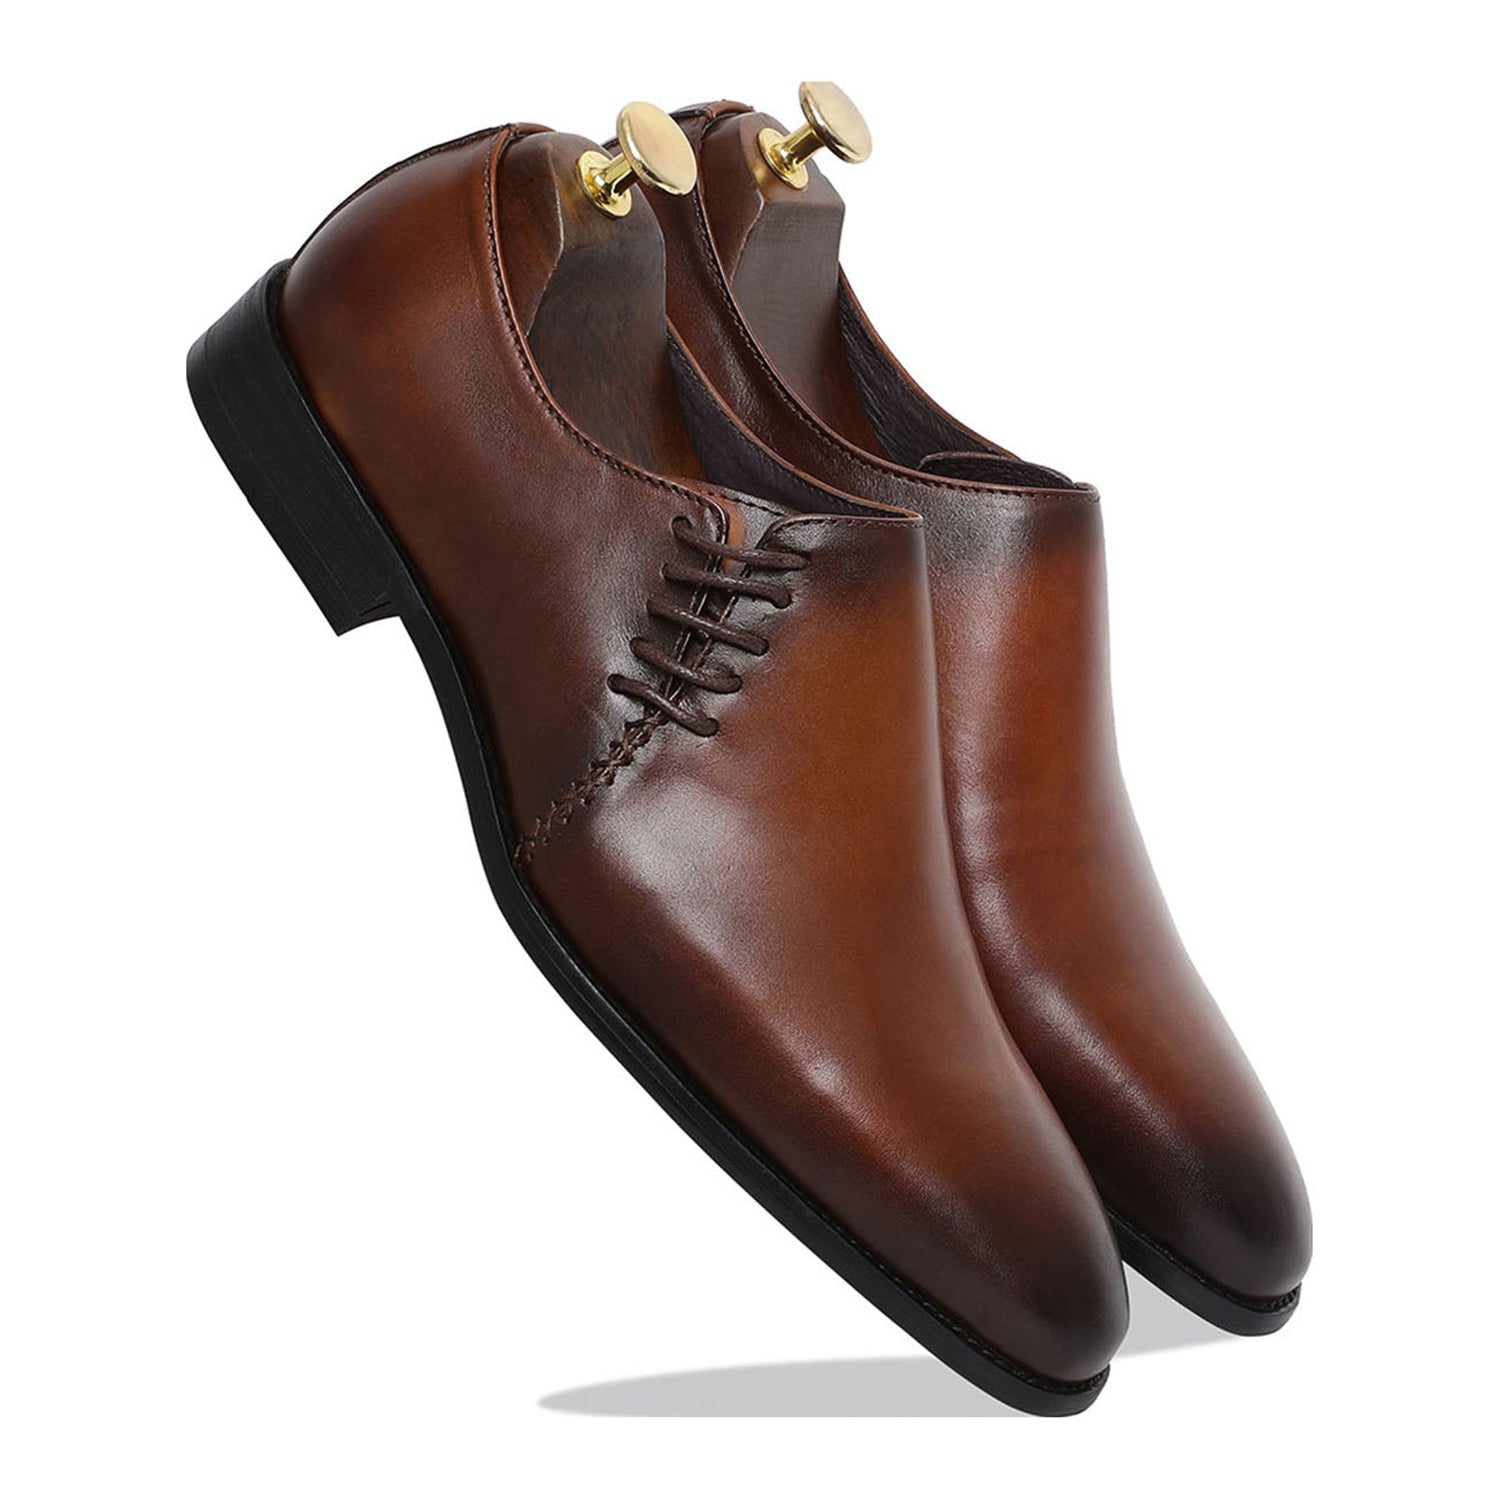 Spanish Brown Leather Shoes